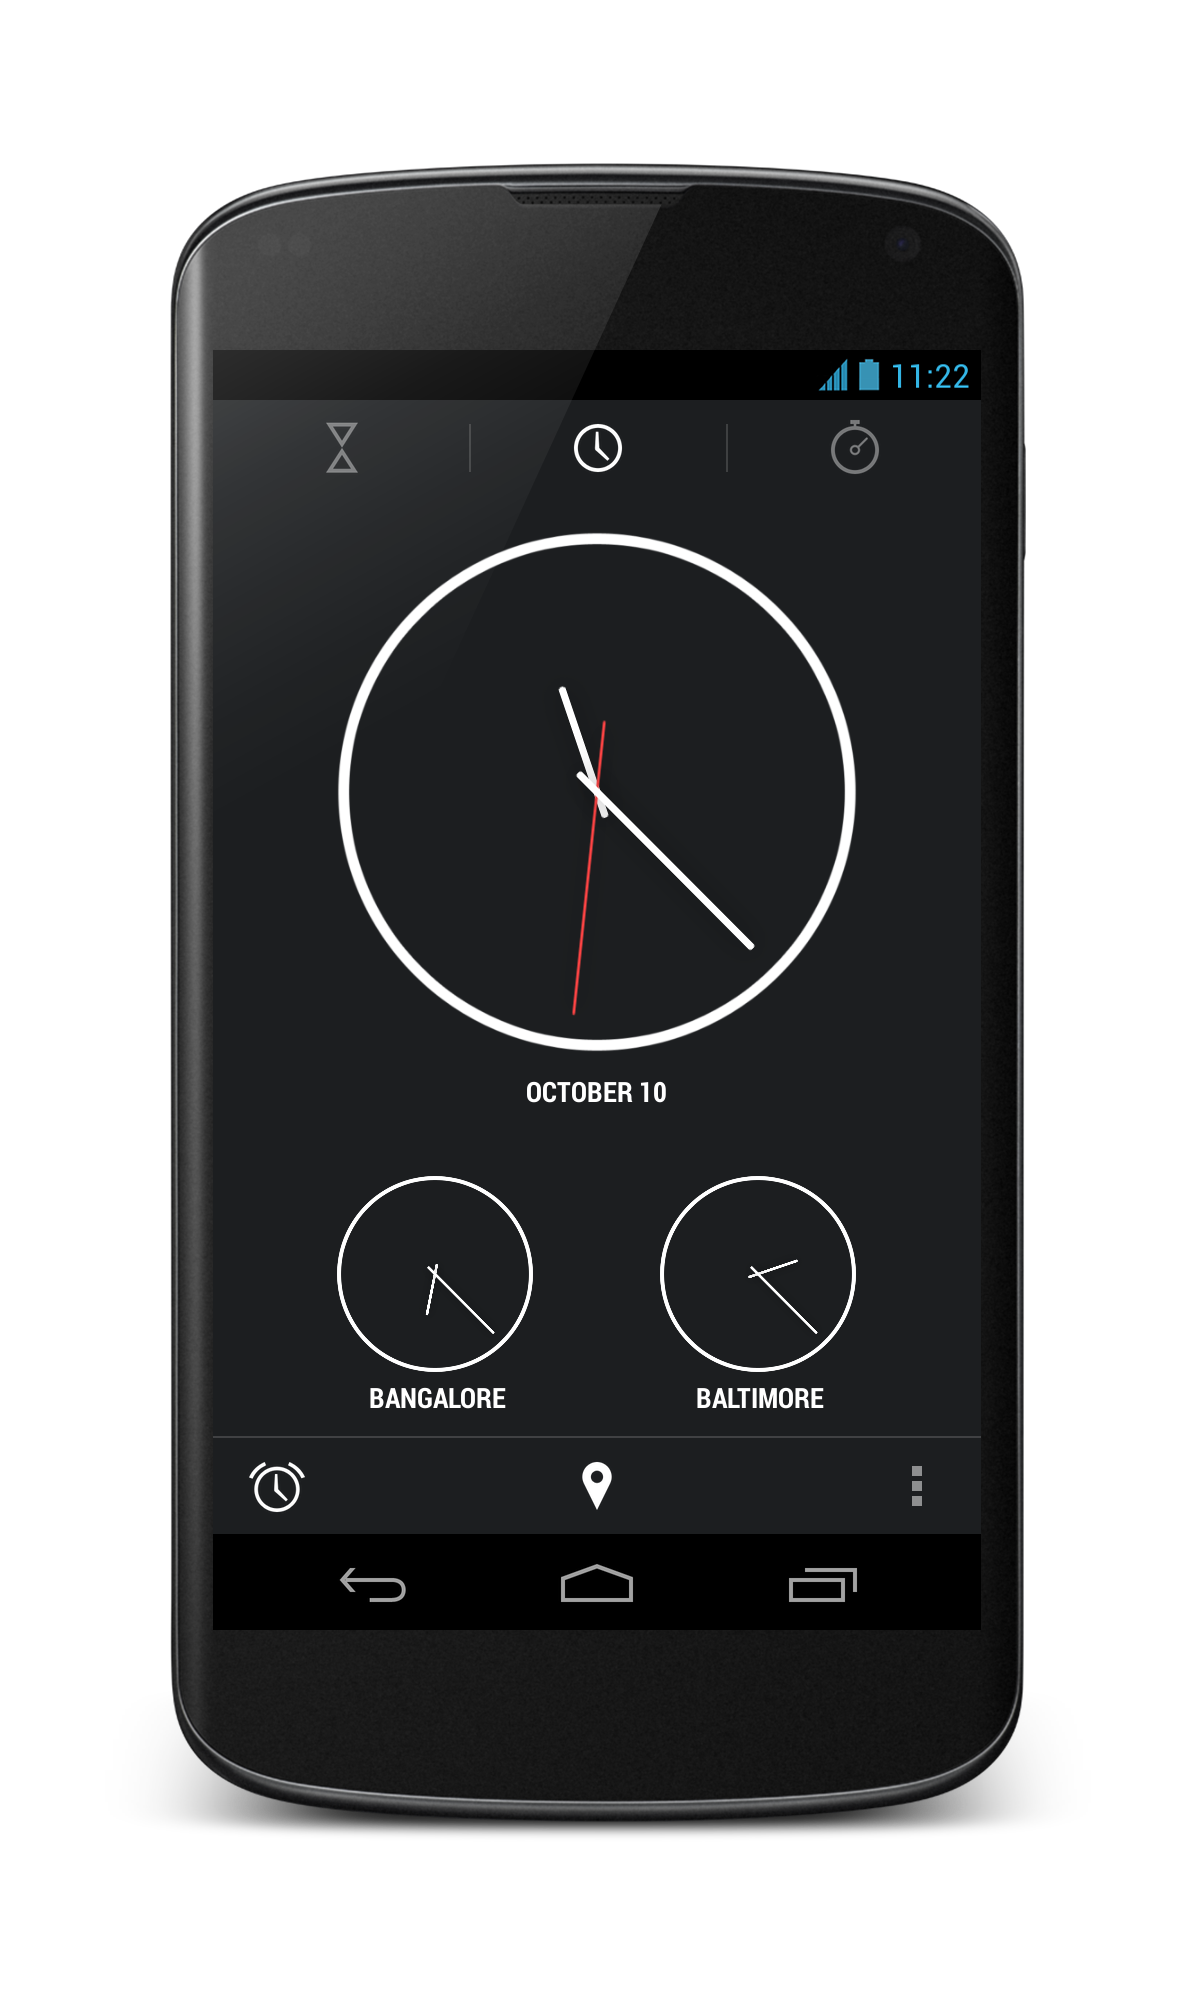 press-image-reveals-android-s-new-clock-ausdroid